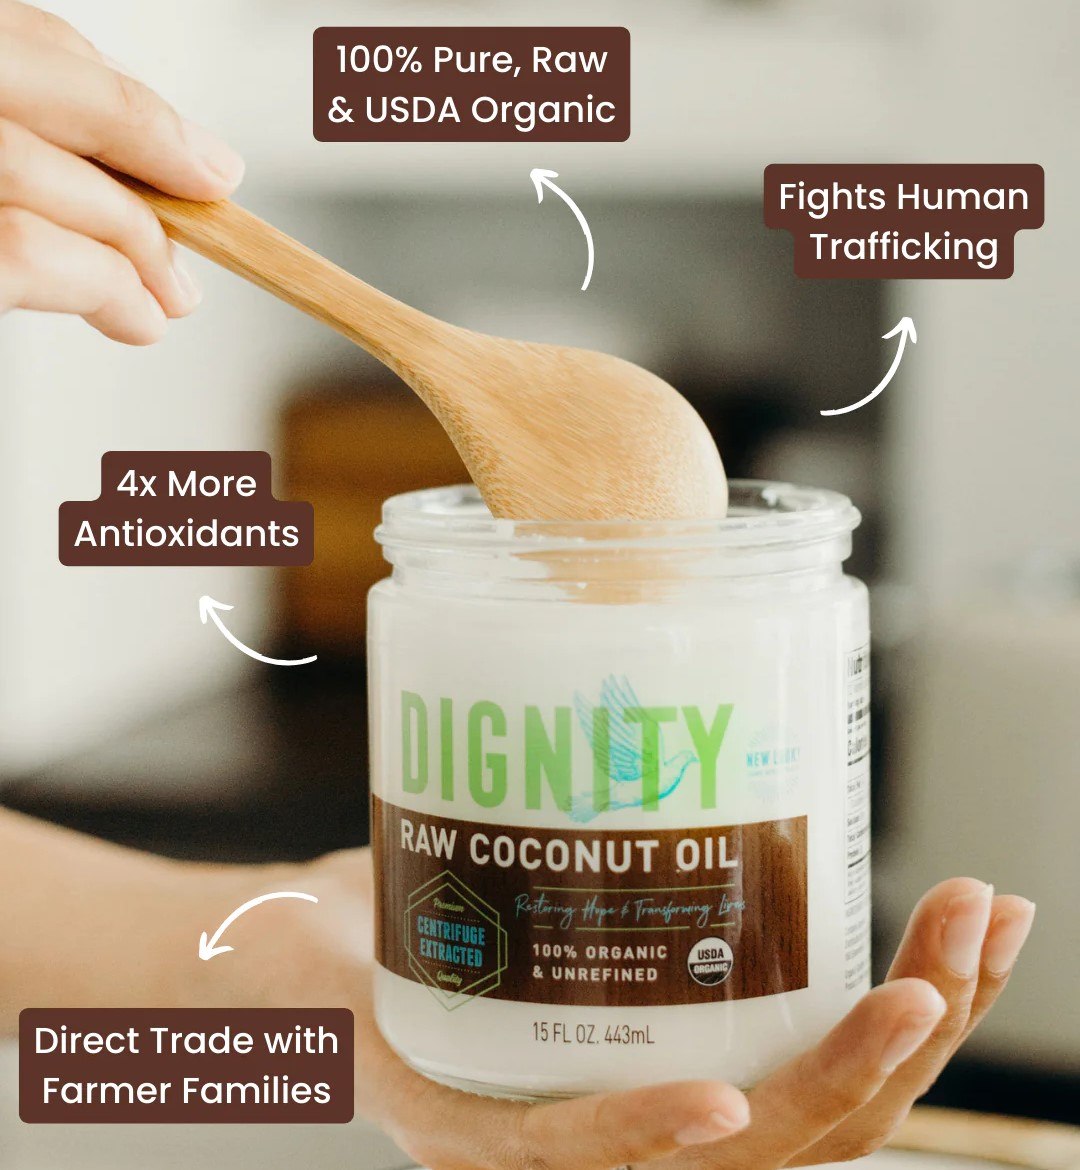 Brands Doing Good: Dignity Coconuts Battle Human Trafficking